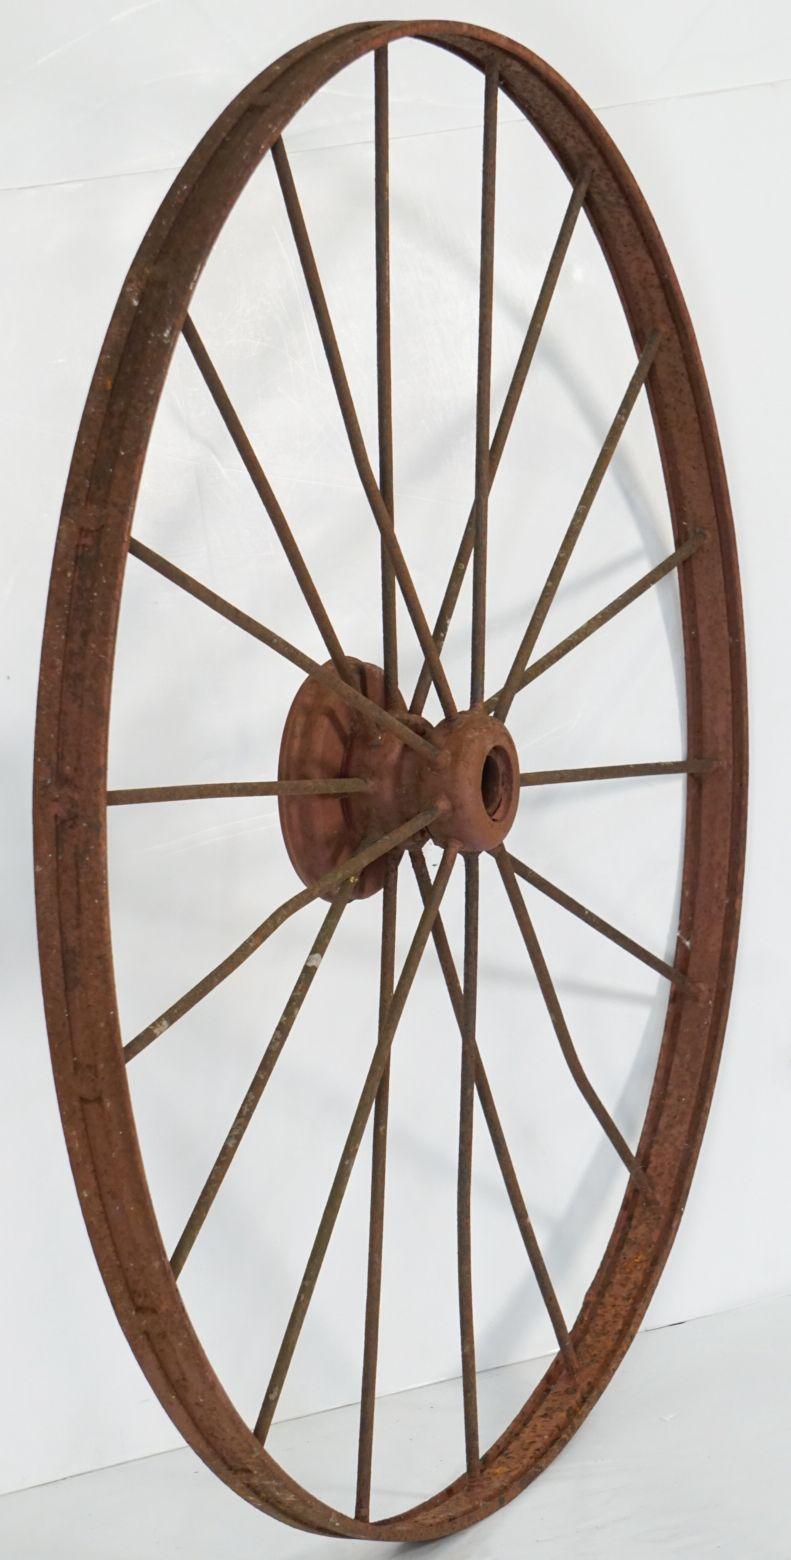 A handsome large English spoked cart or wagon wheel (54 inches diameter) of iron from the late 19th century, with 18 spokes around the wheel hub.

A nice feature for a garden or patio!